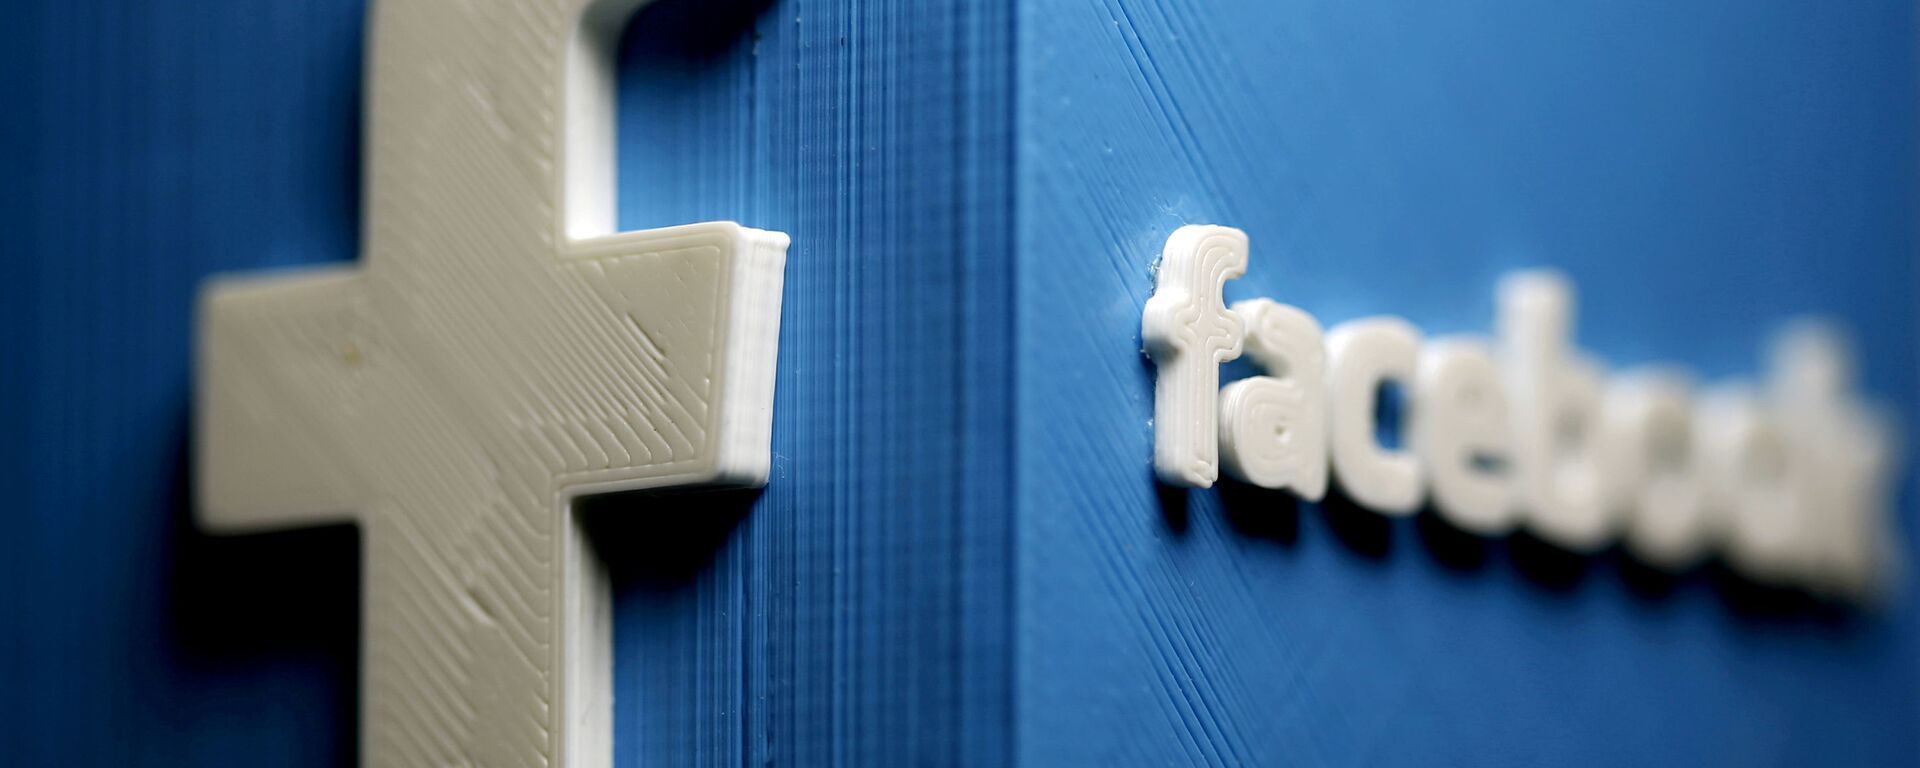 A 3D plastic representation of the Facebook logo is seen in this illustration in Zenica, Bosnia and Herzegovina, May 13, 2015. REUTERS/Dado Ruvic//File Photo/File Photo - Sputnik International, 1920, 22.09.2021